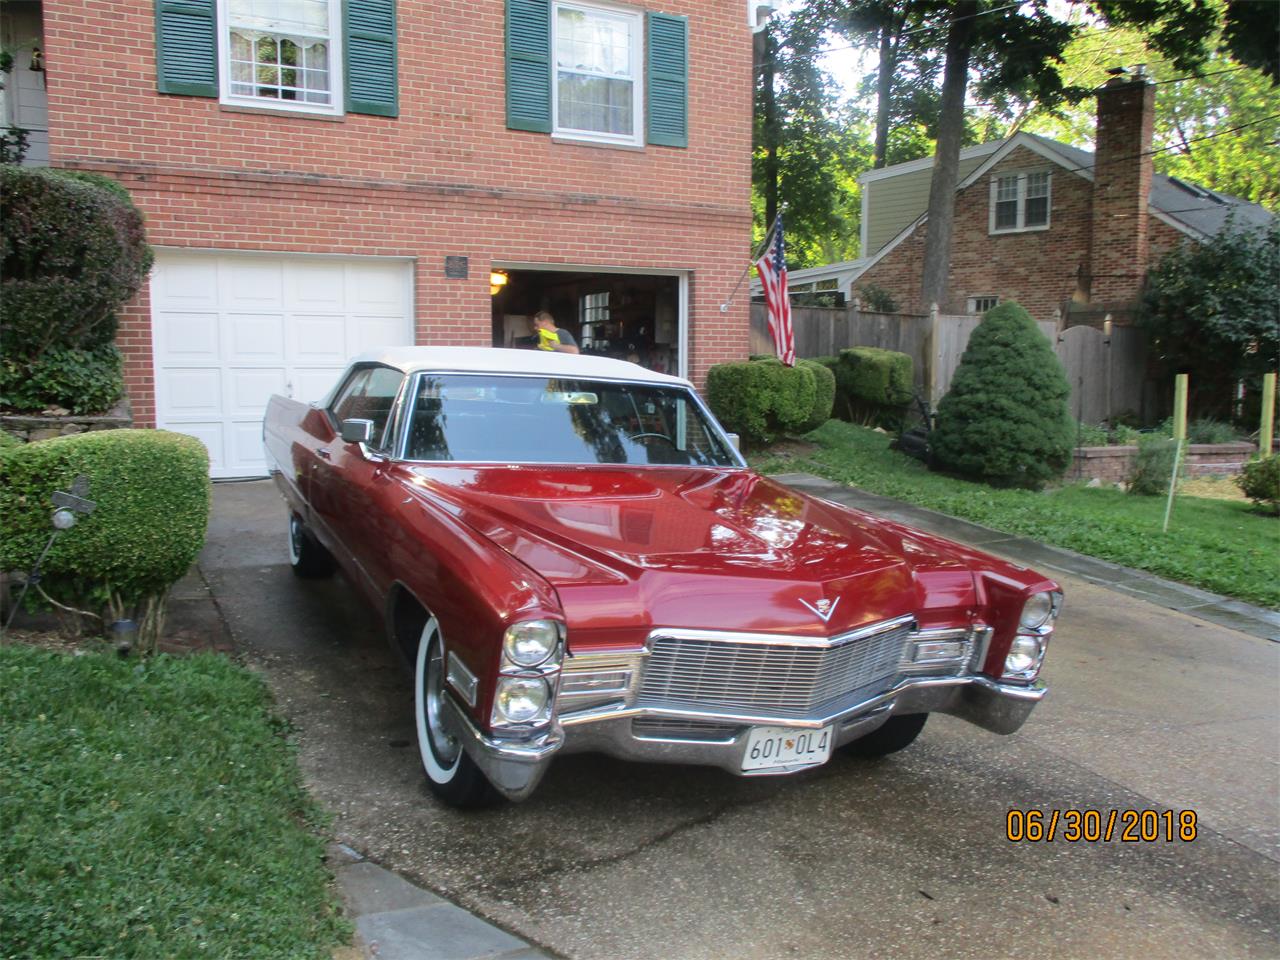 1968 cadillac convertible for sale classiccars com cc 1110434 1968 cadillac convertible for sale